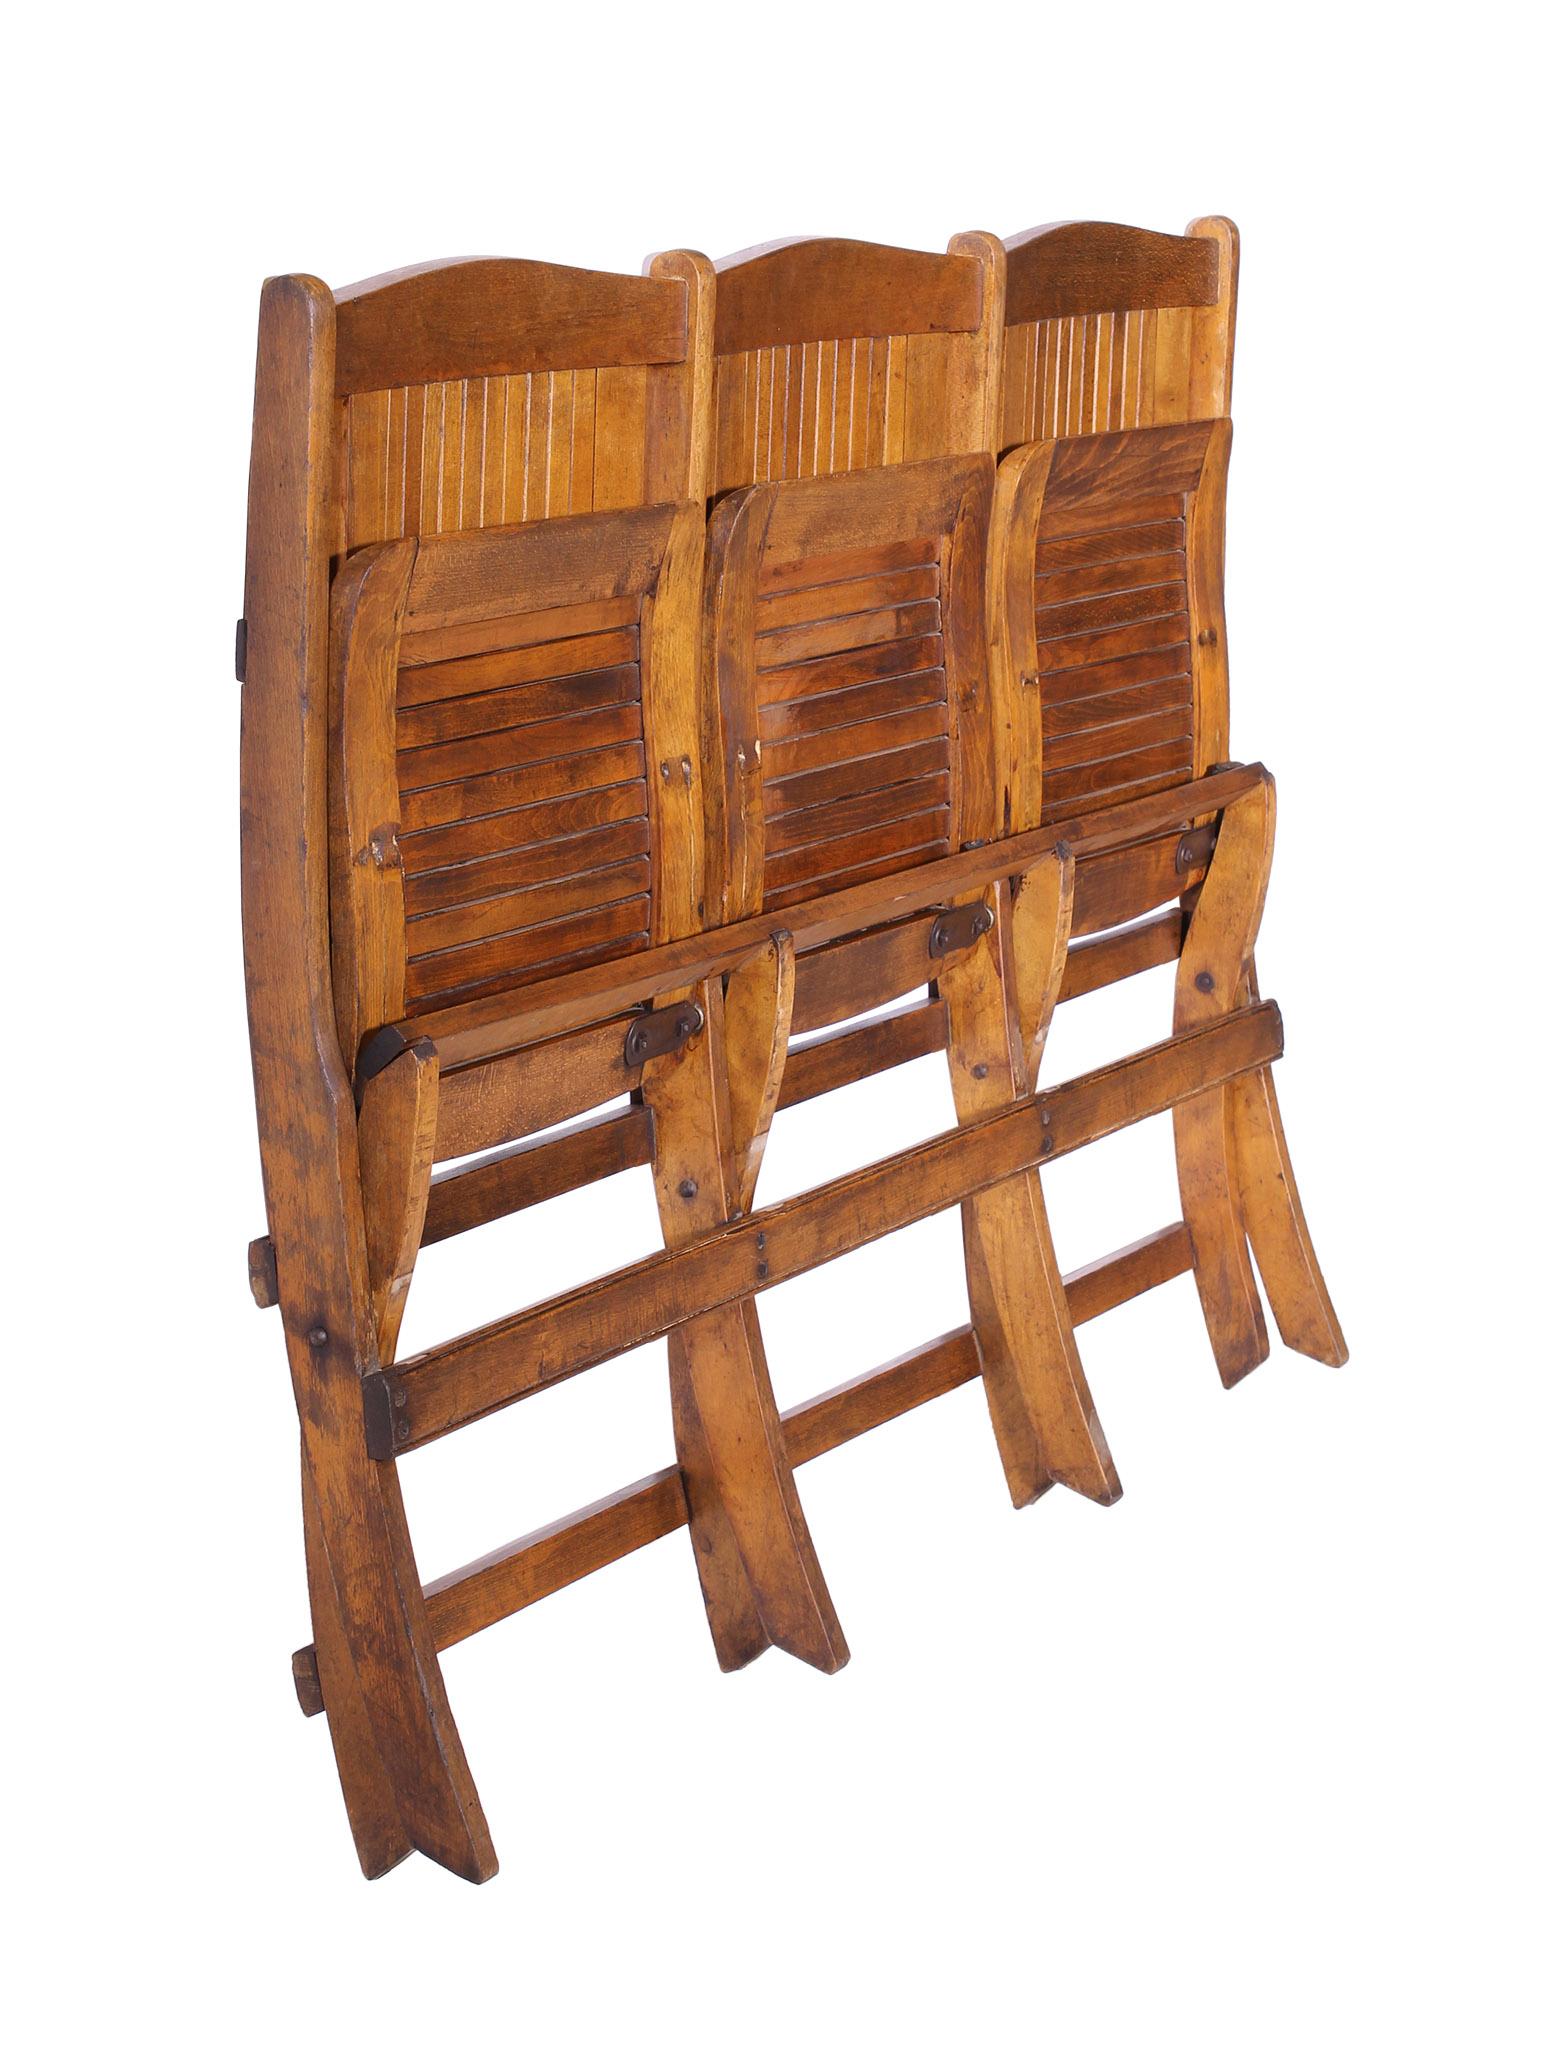 Bank of Folding Chairs / Bench 3